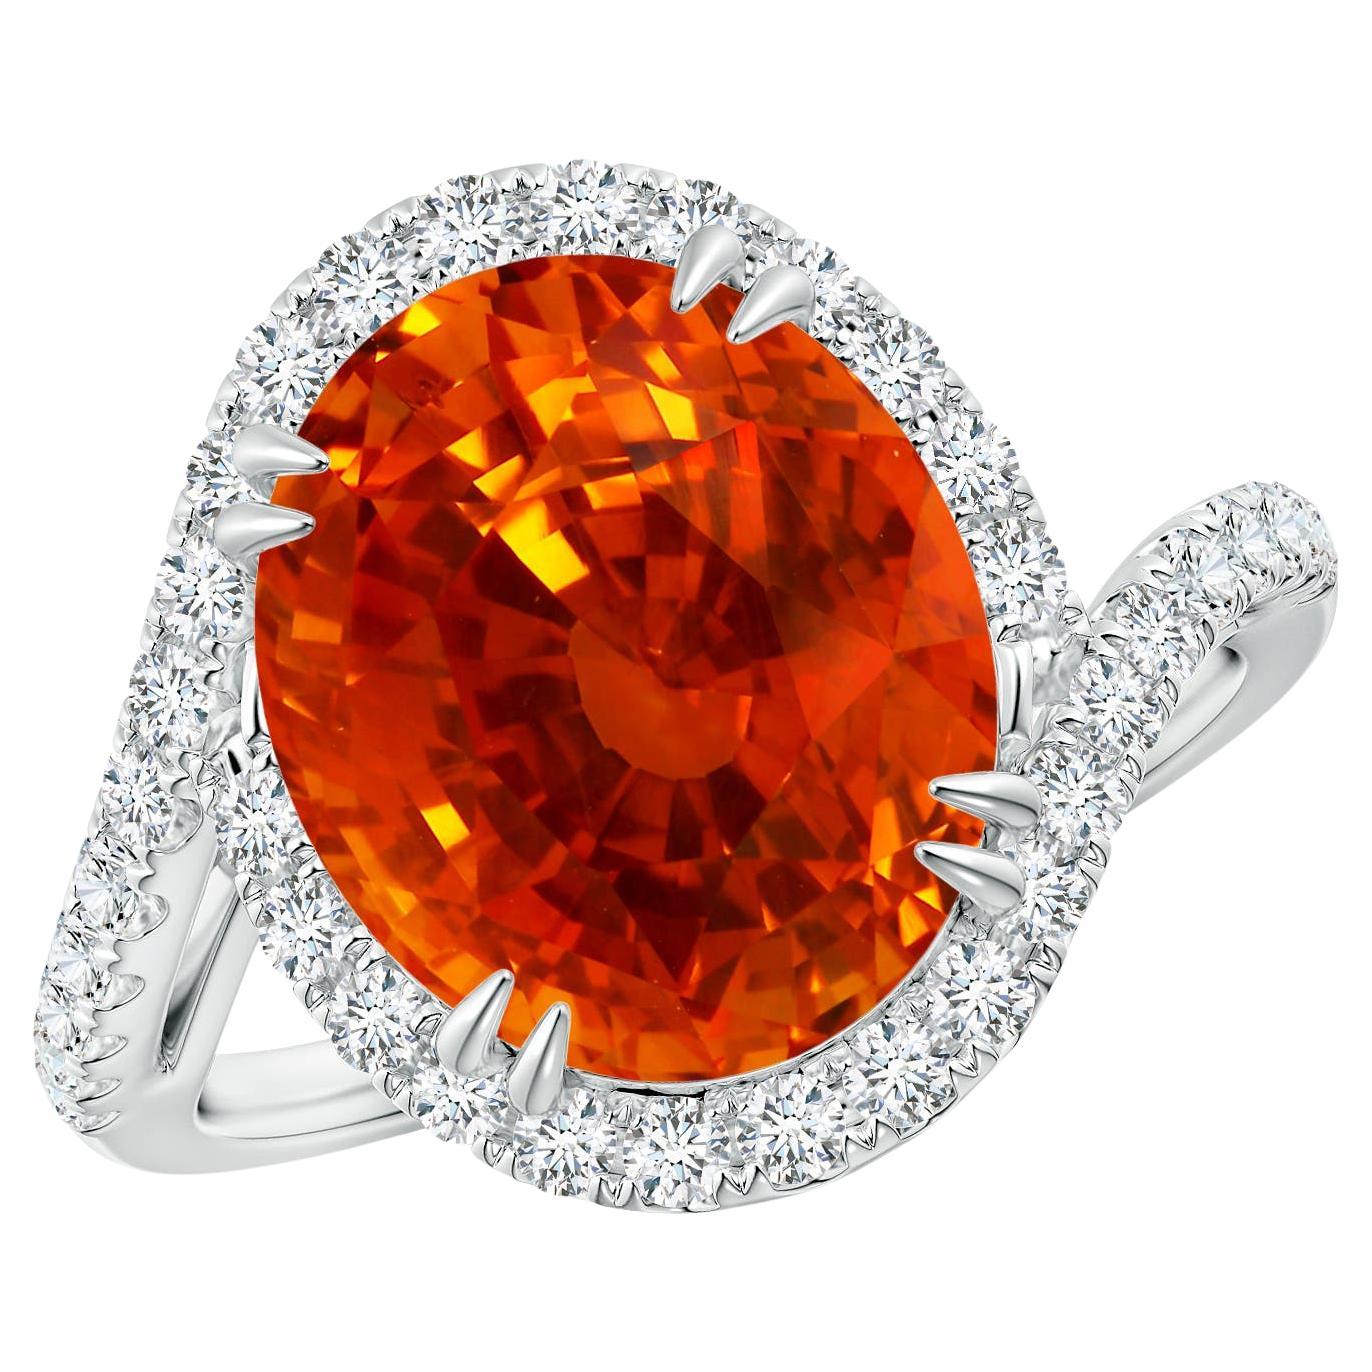 For Sale:  Angara GIA Certified Natural Orange Sapphire Ring in White Gold with Diamonds